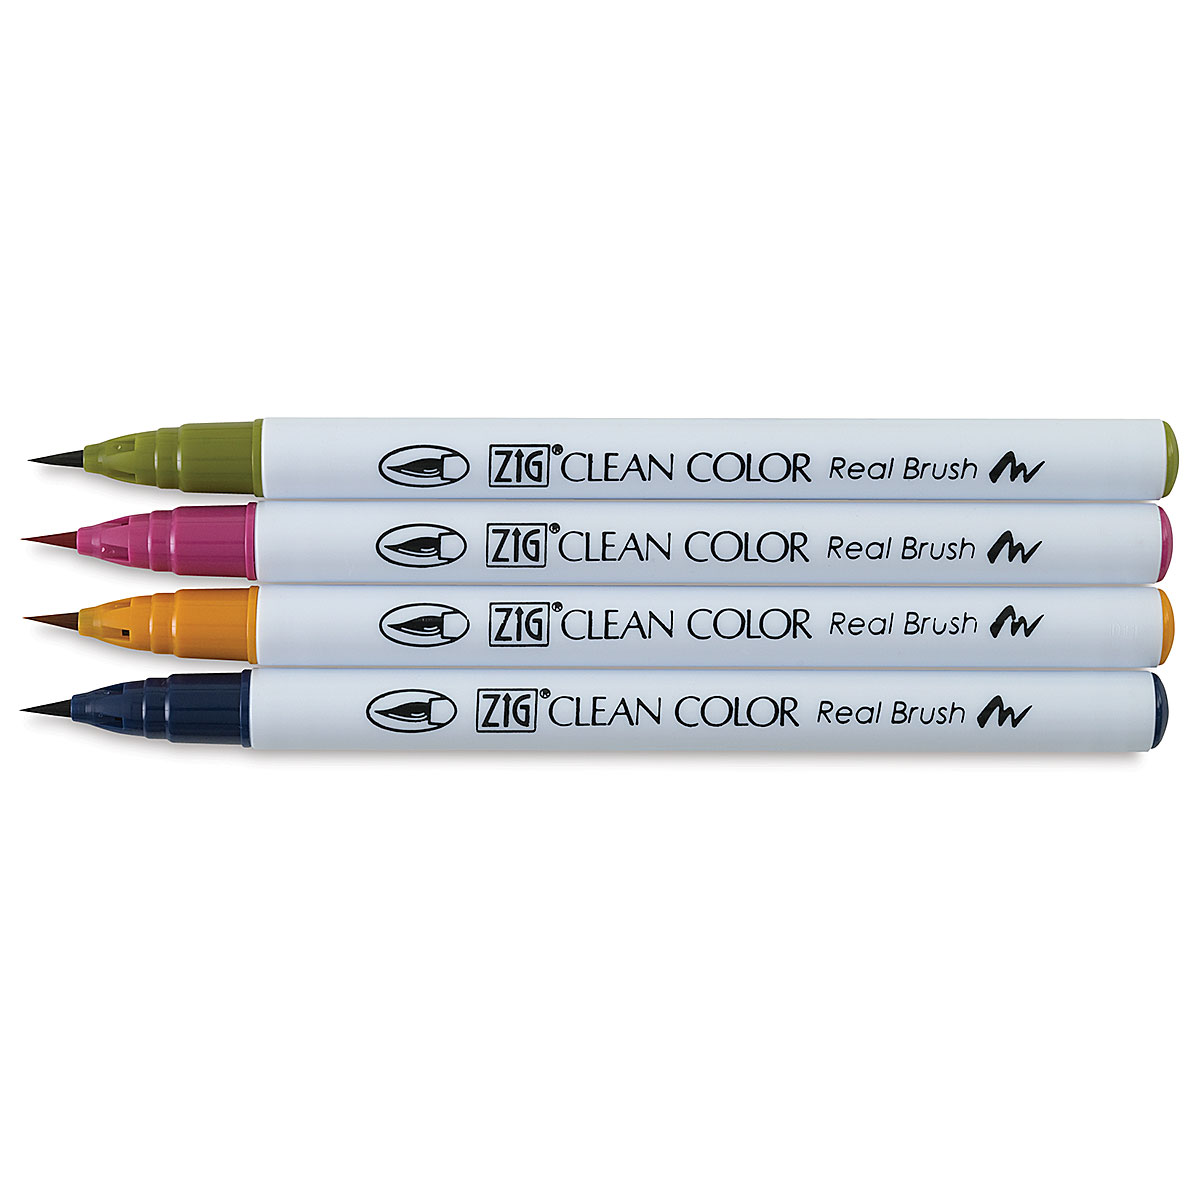 Zig Clean Color Real Brush Set of 4, Deep